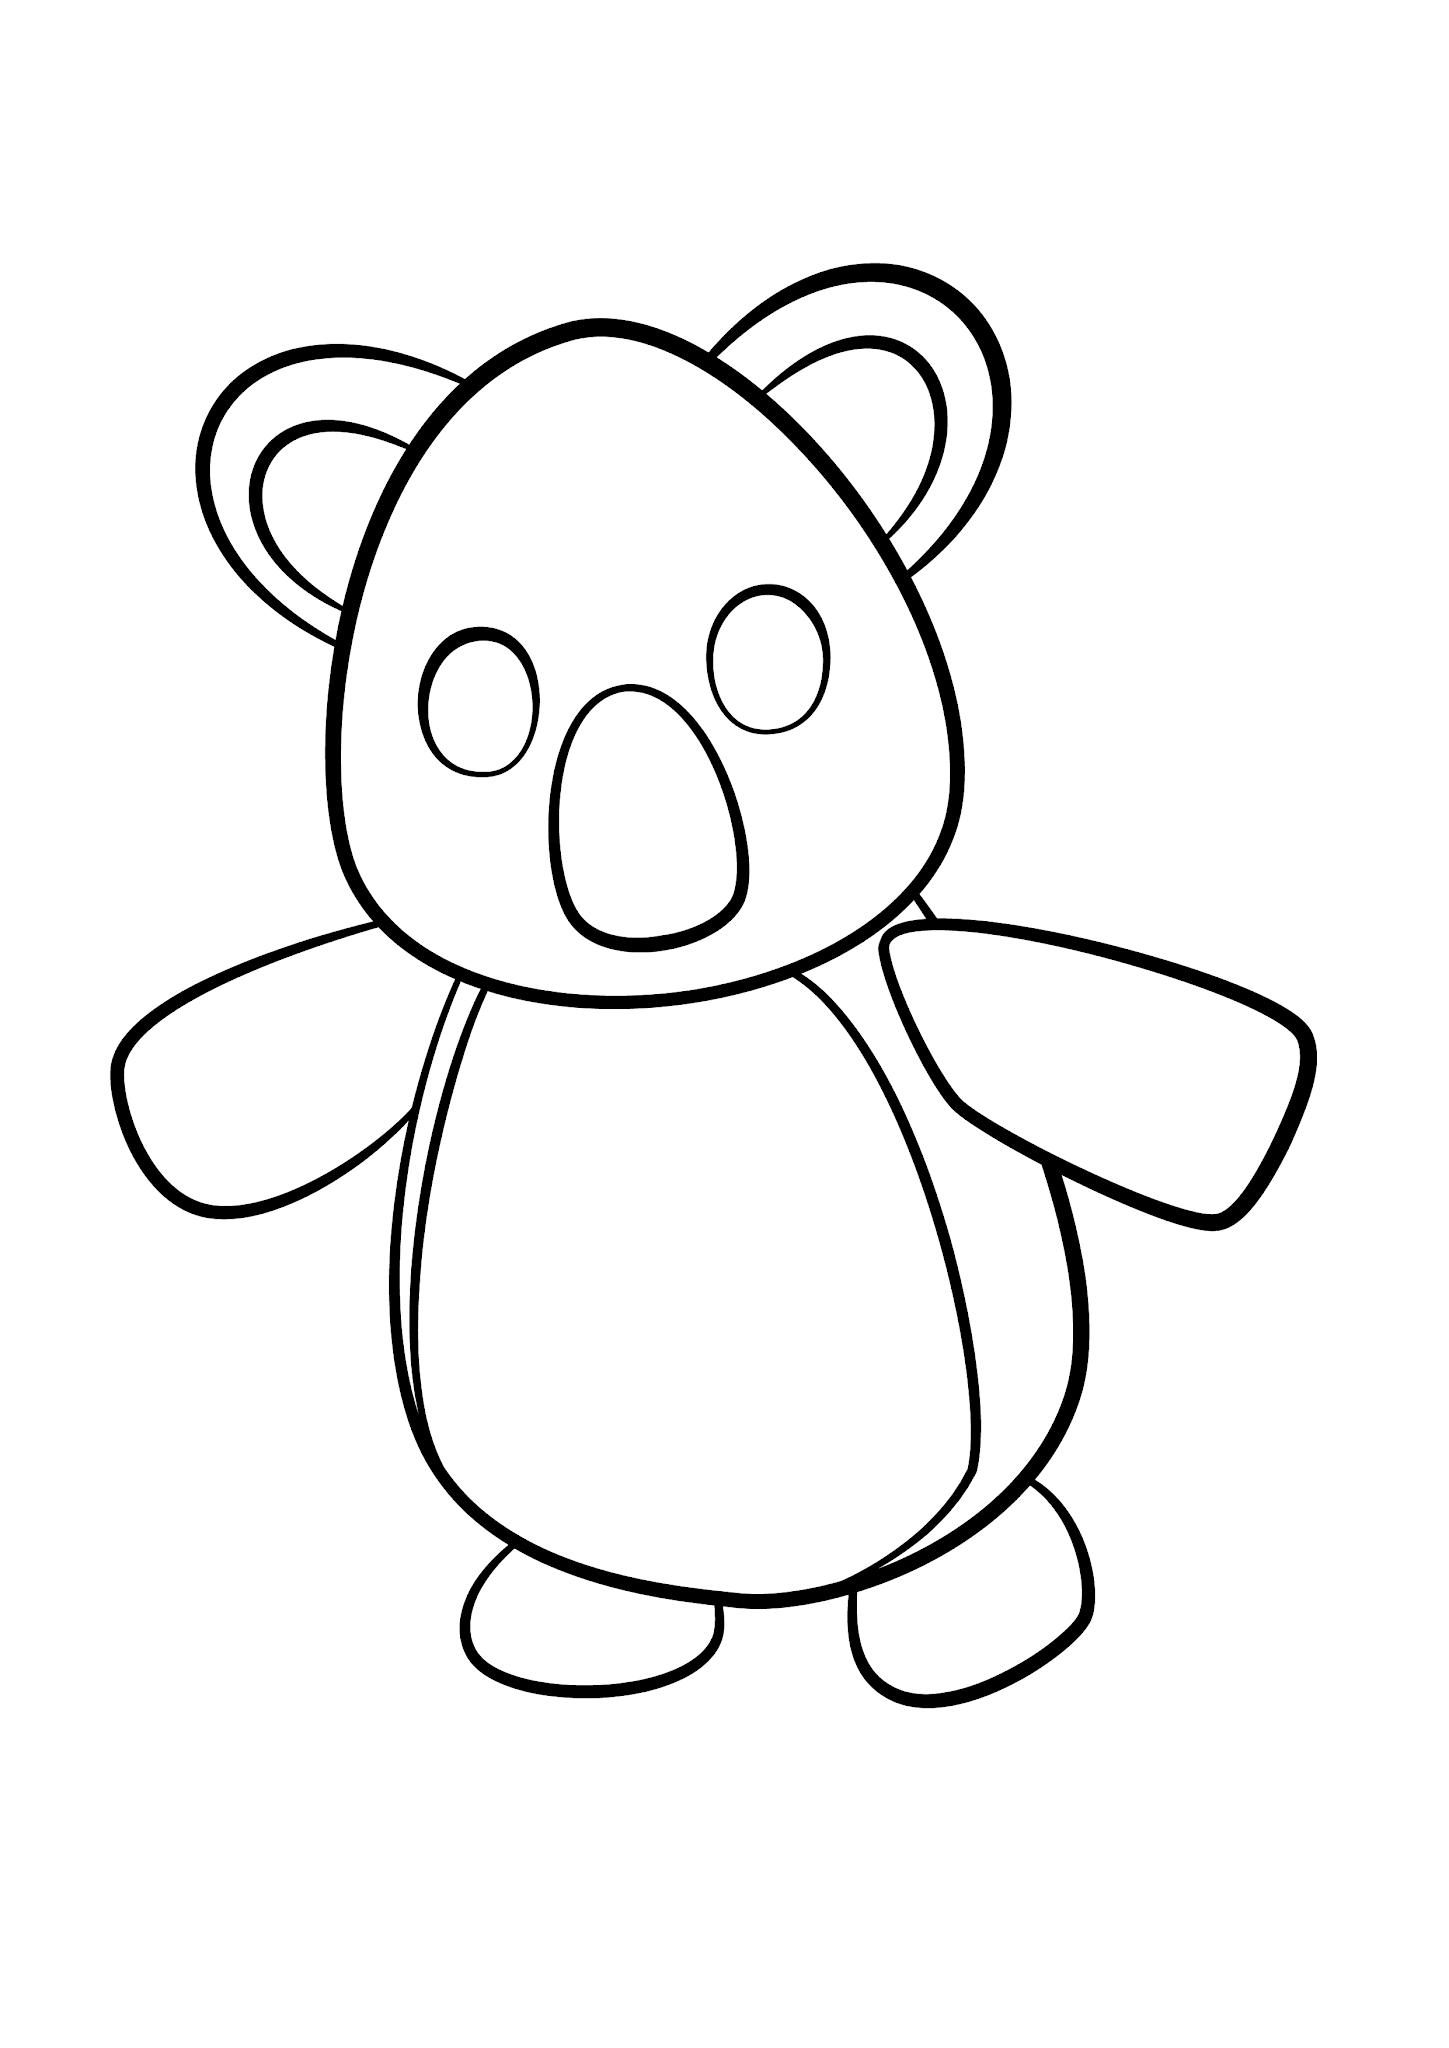 Adopt Me Pets Coloring Pages Coloring Home - roblox adopt me pets coloring page